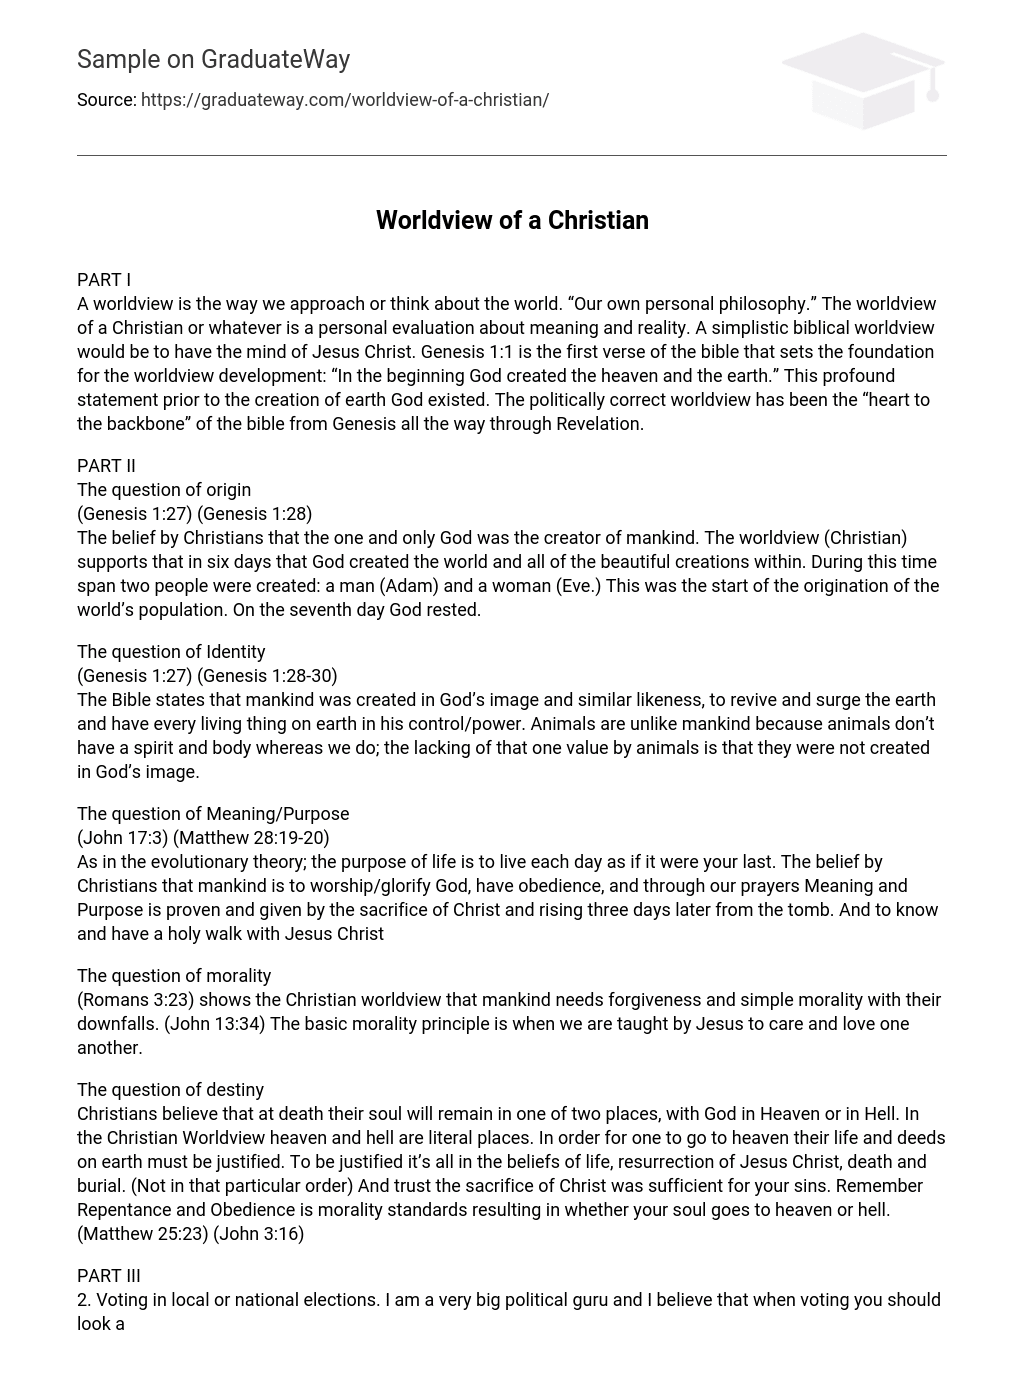 Worldview of a Christian